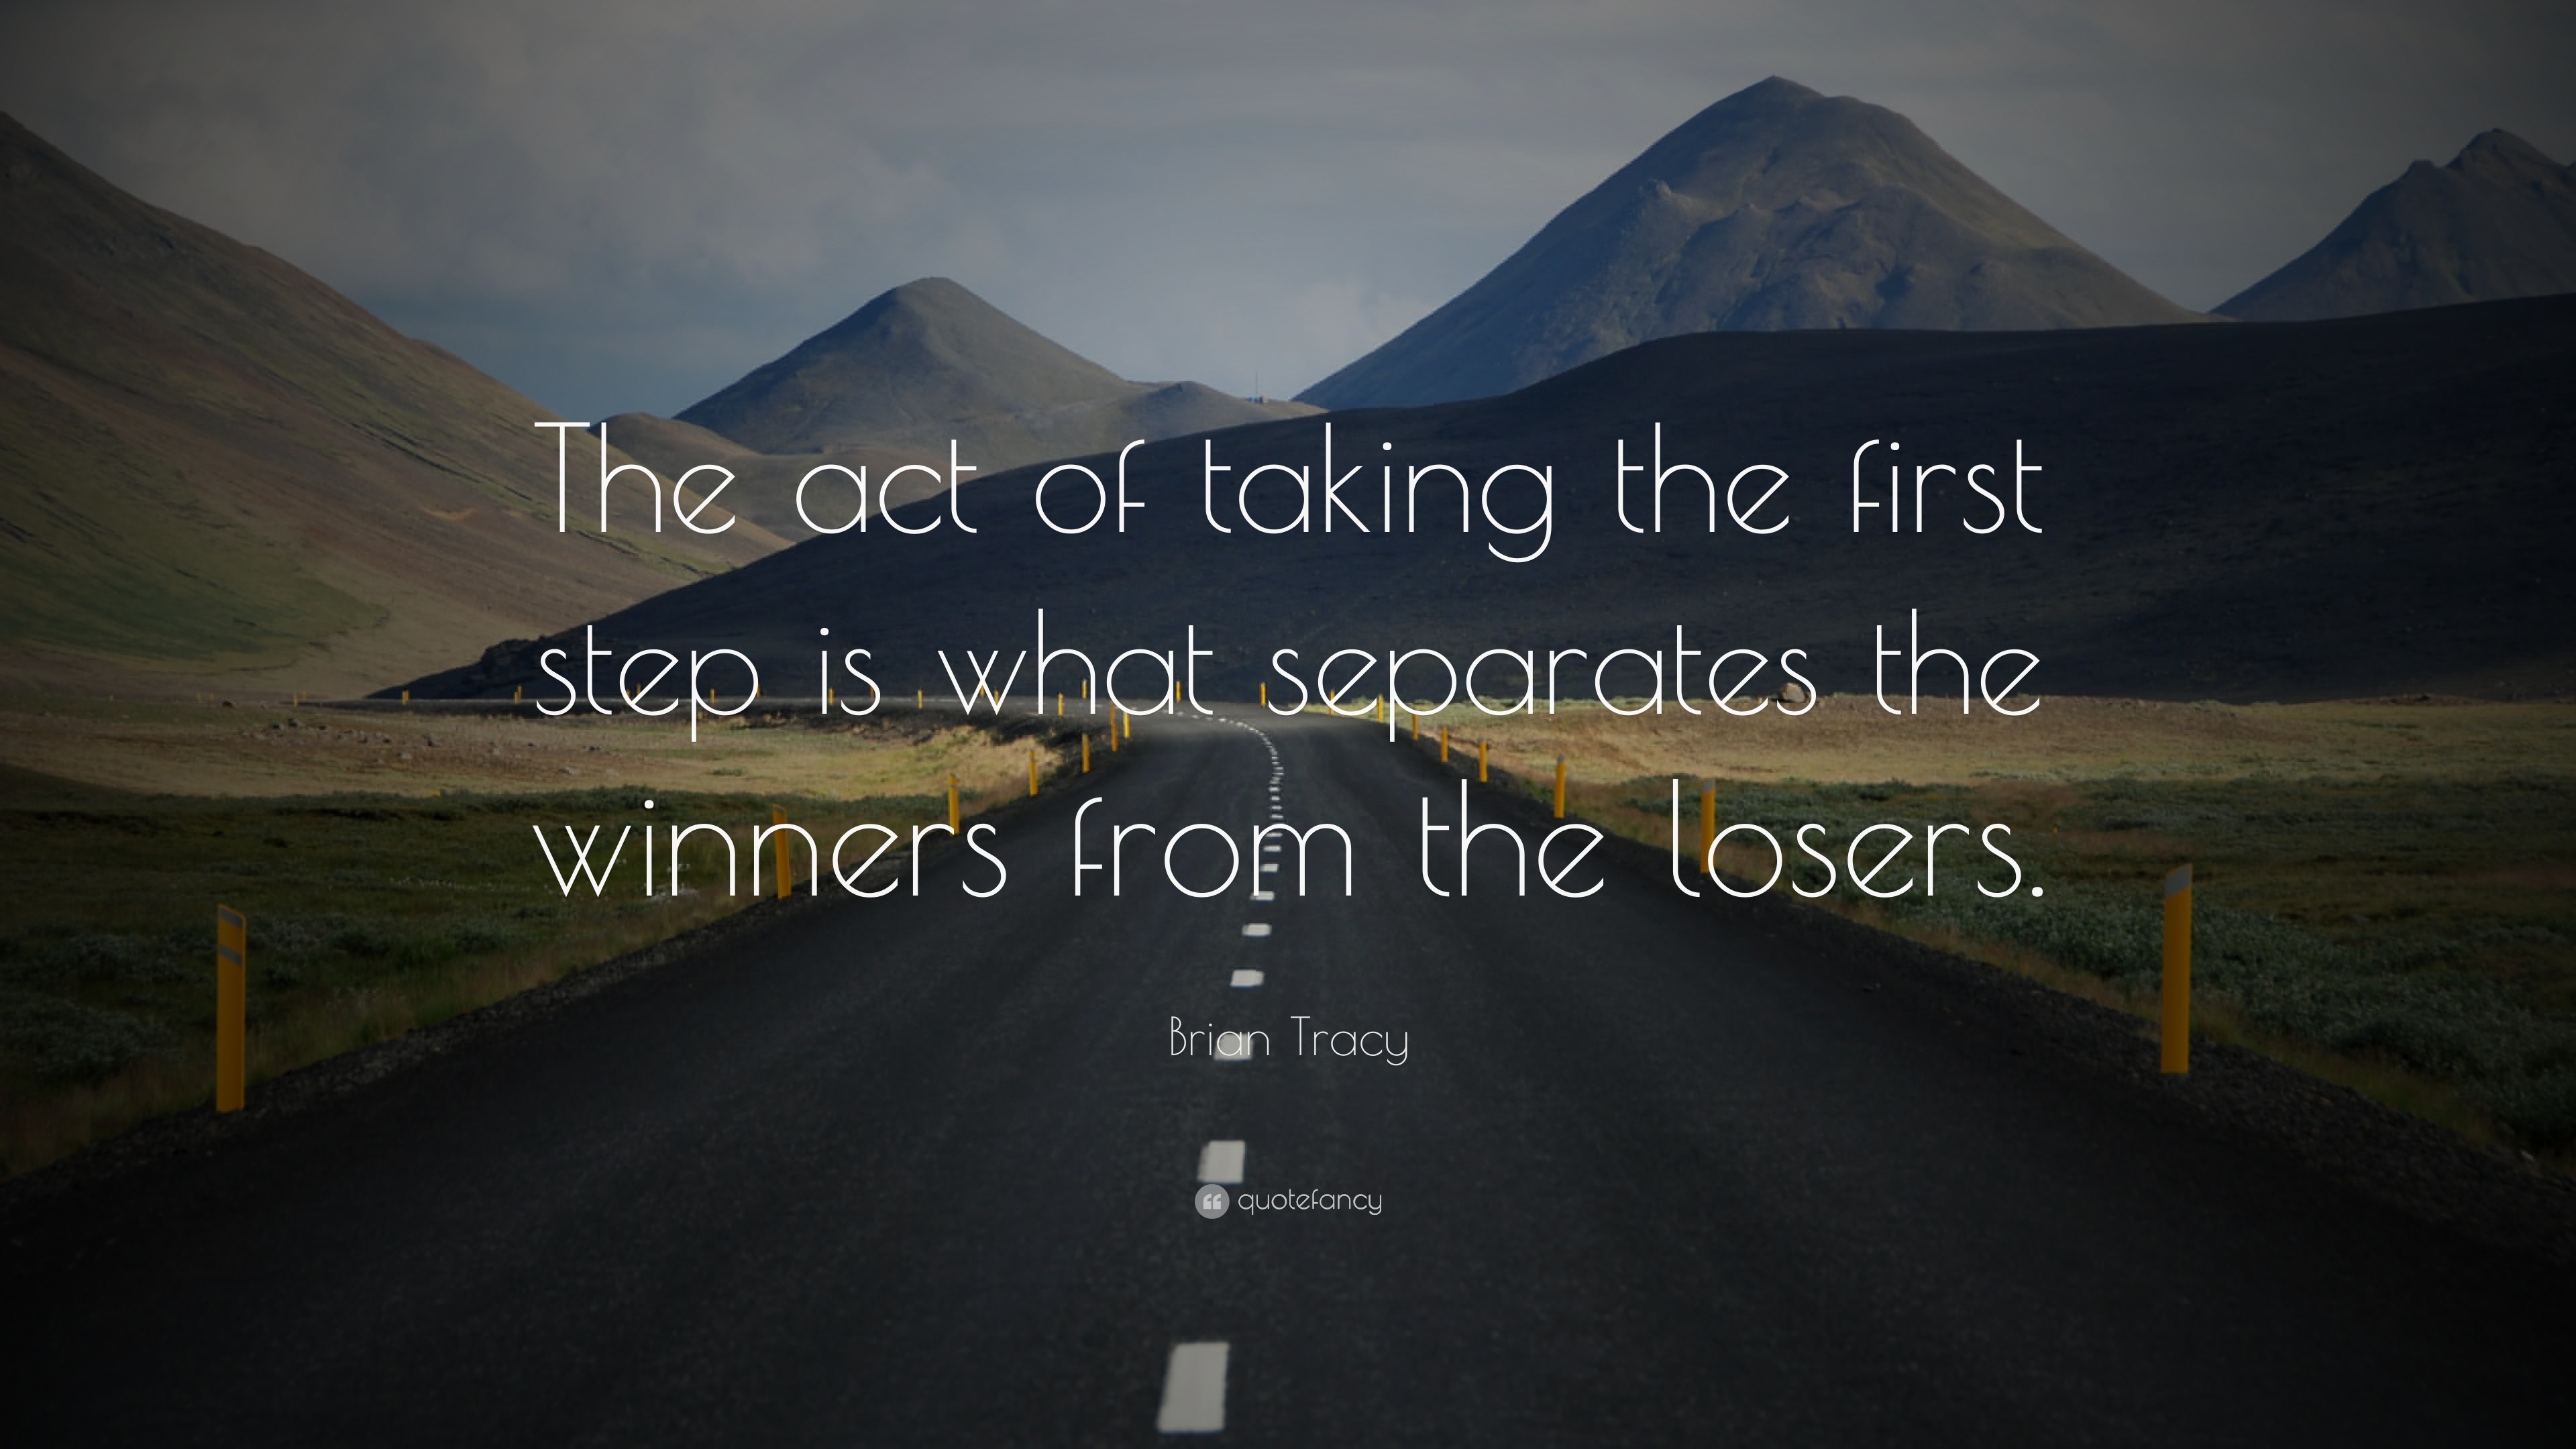 Brian Tracy Quote: “The act of taking the first step is what separates